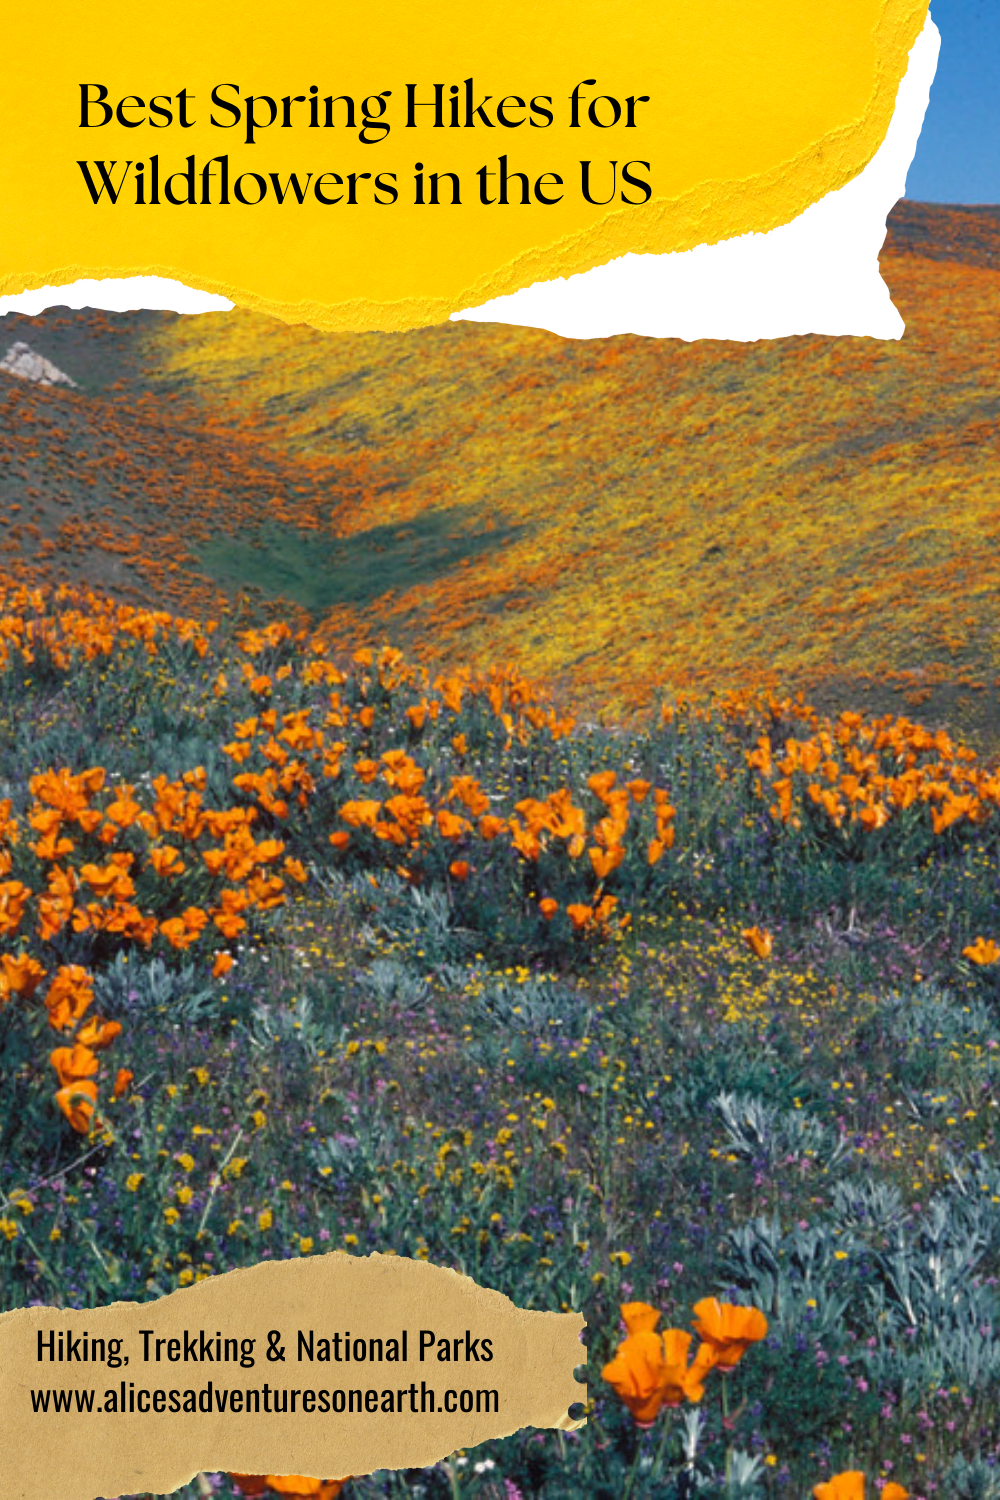 Explore the best hikes in the US for wildflowers and spring views #hiking #wildflowers #spring 